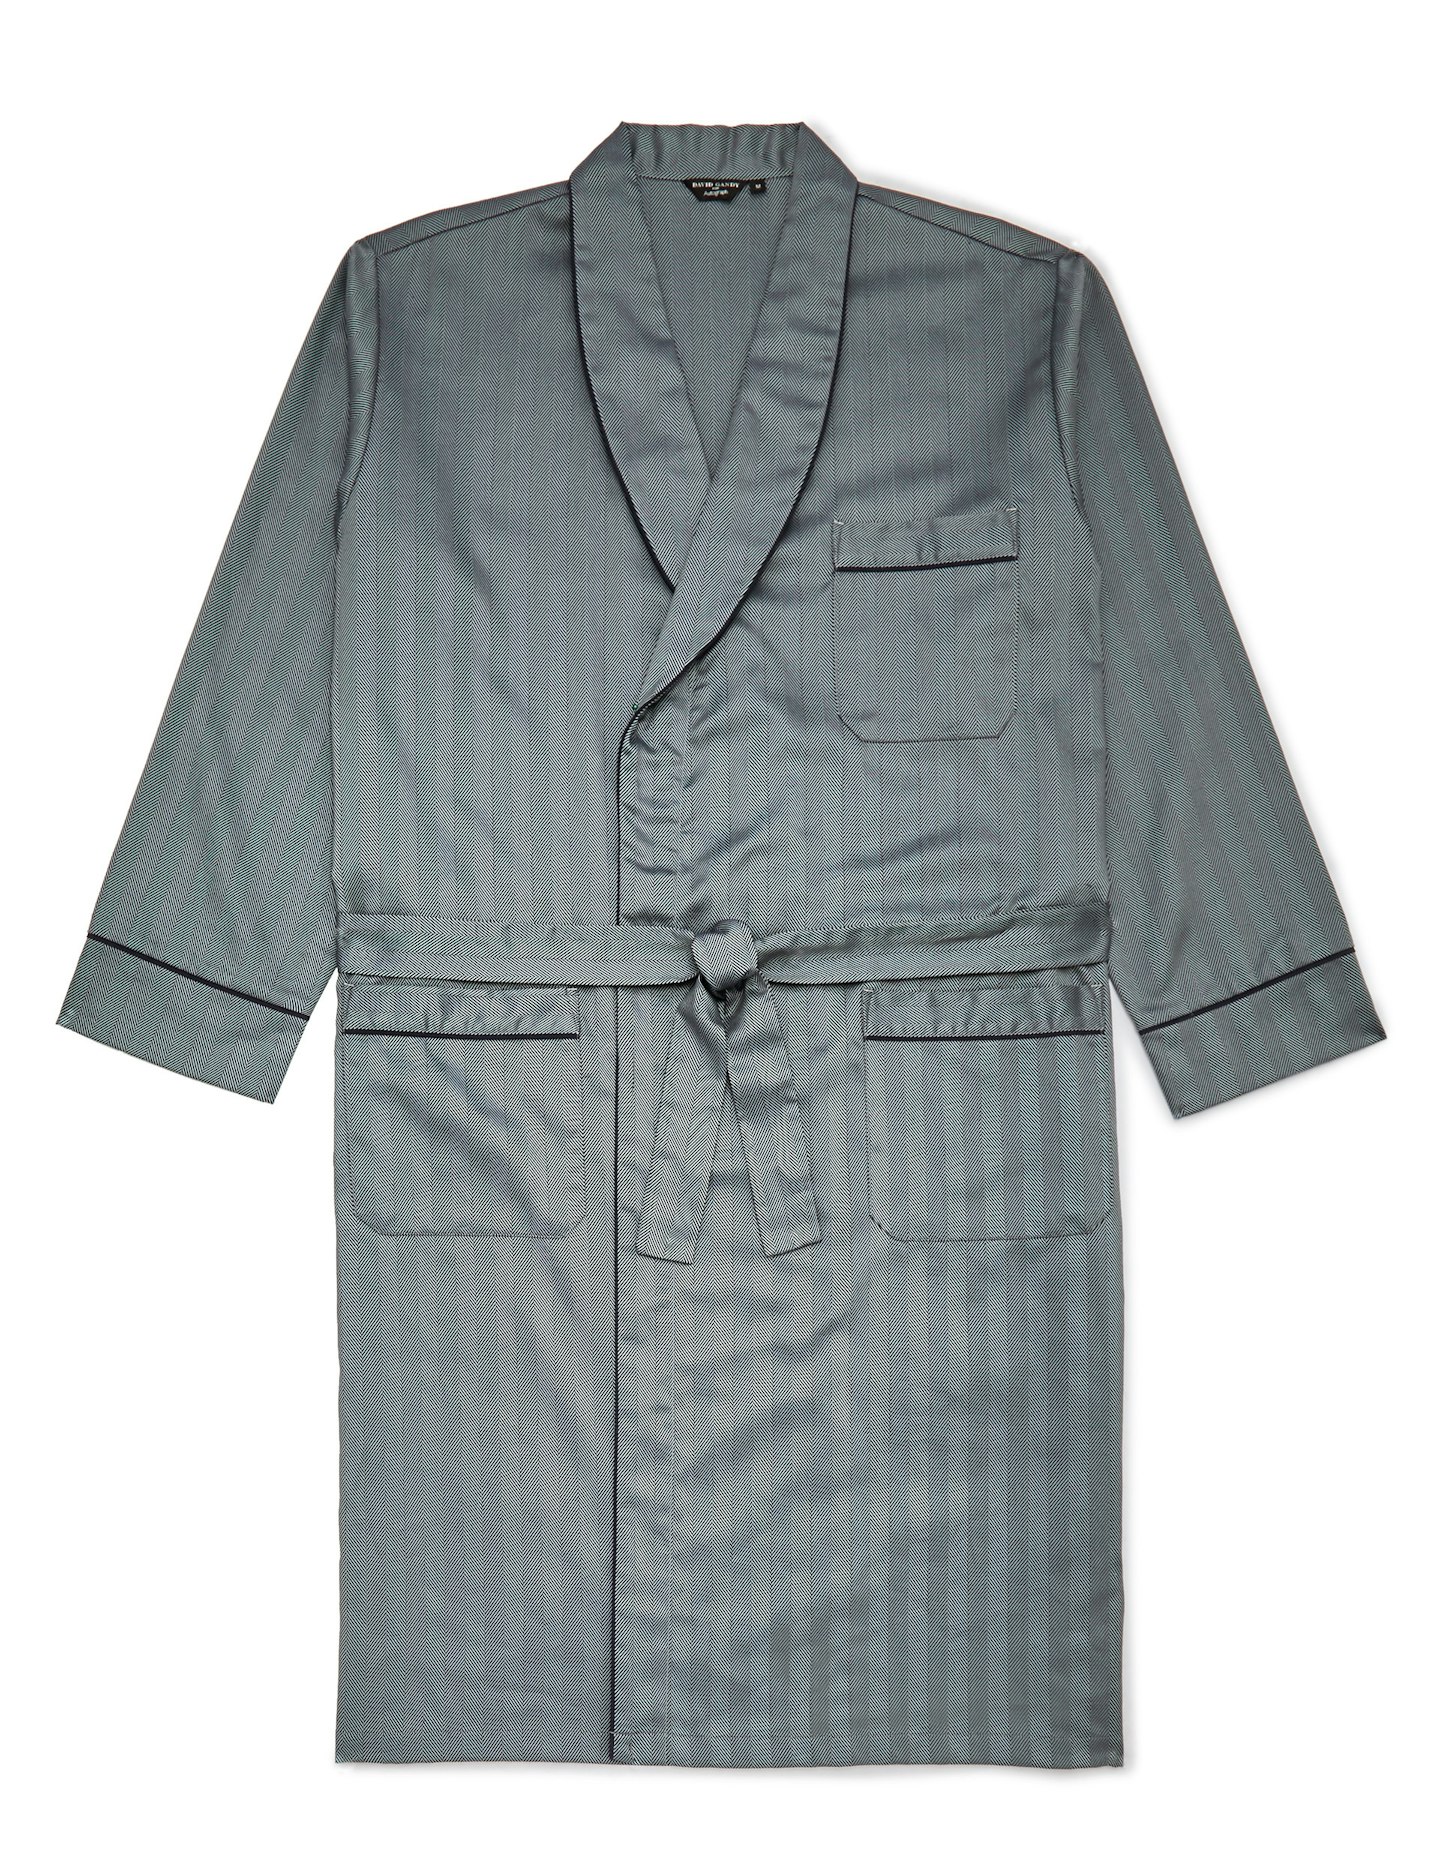 David Gandy For Autograph Dressing Gown, &pound;49.50